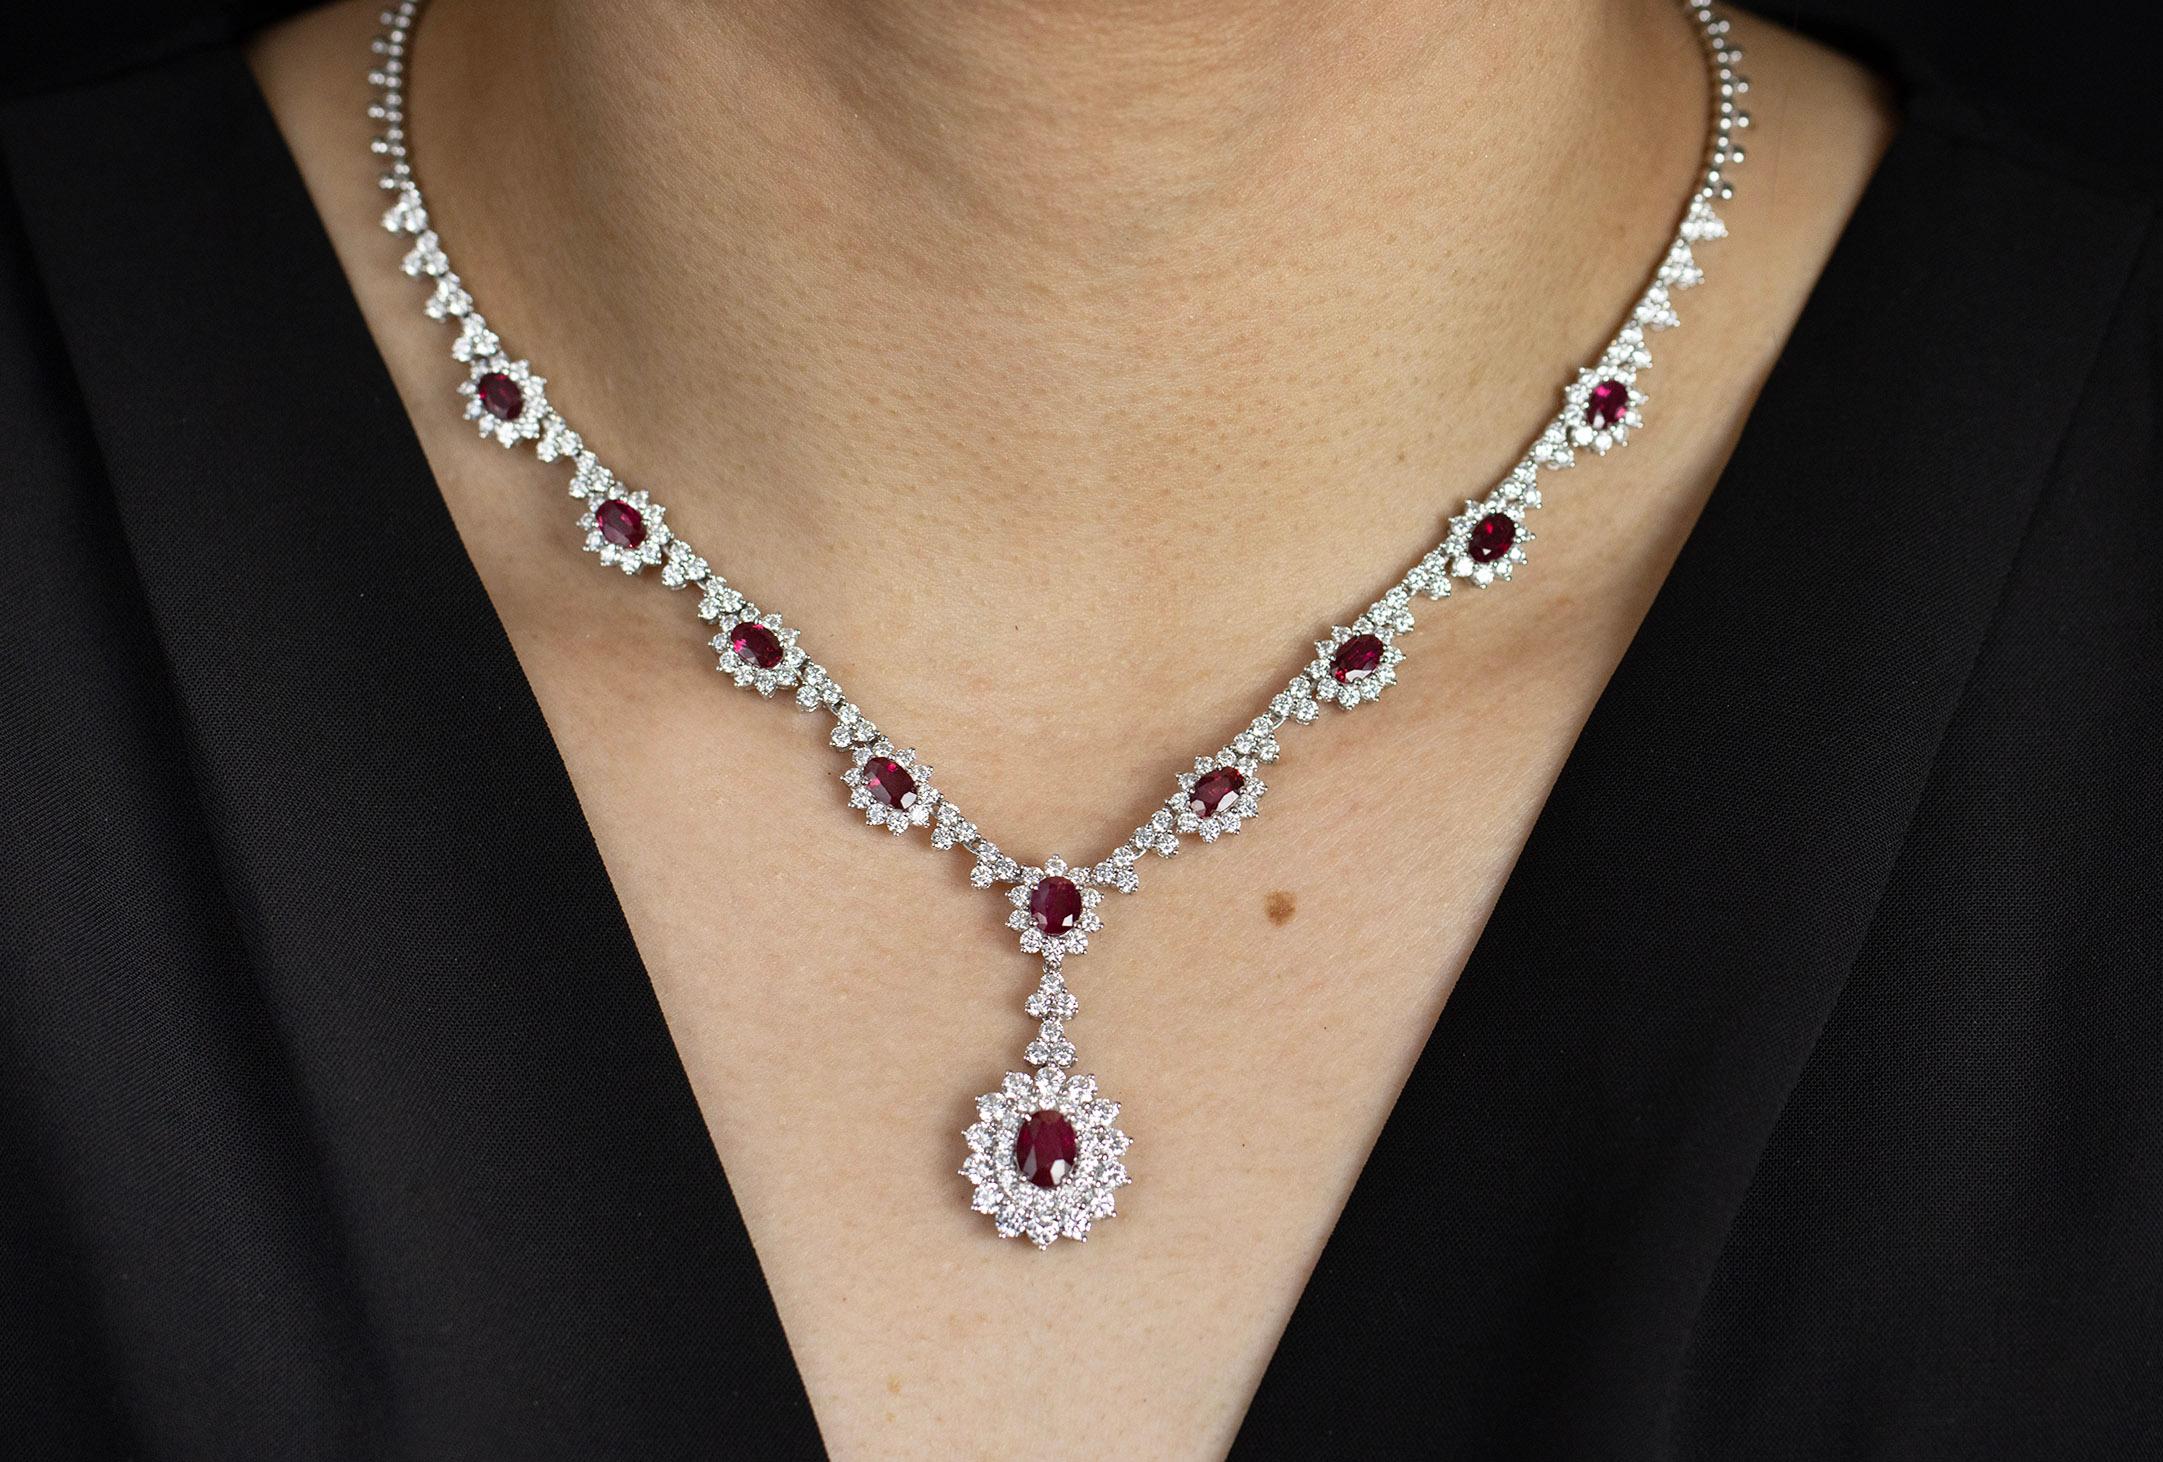 Roman Malakov 5.93 Carat Oval Cut Rubies with Diamond Halo Pendant Necklace In New Condition For Sale In New York, NY